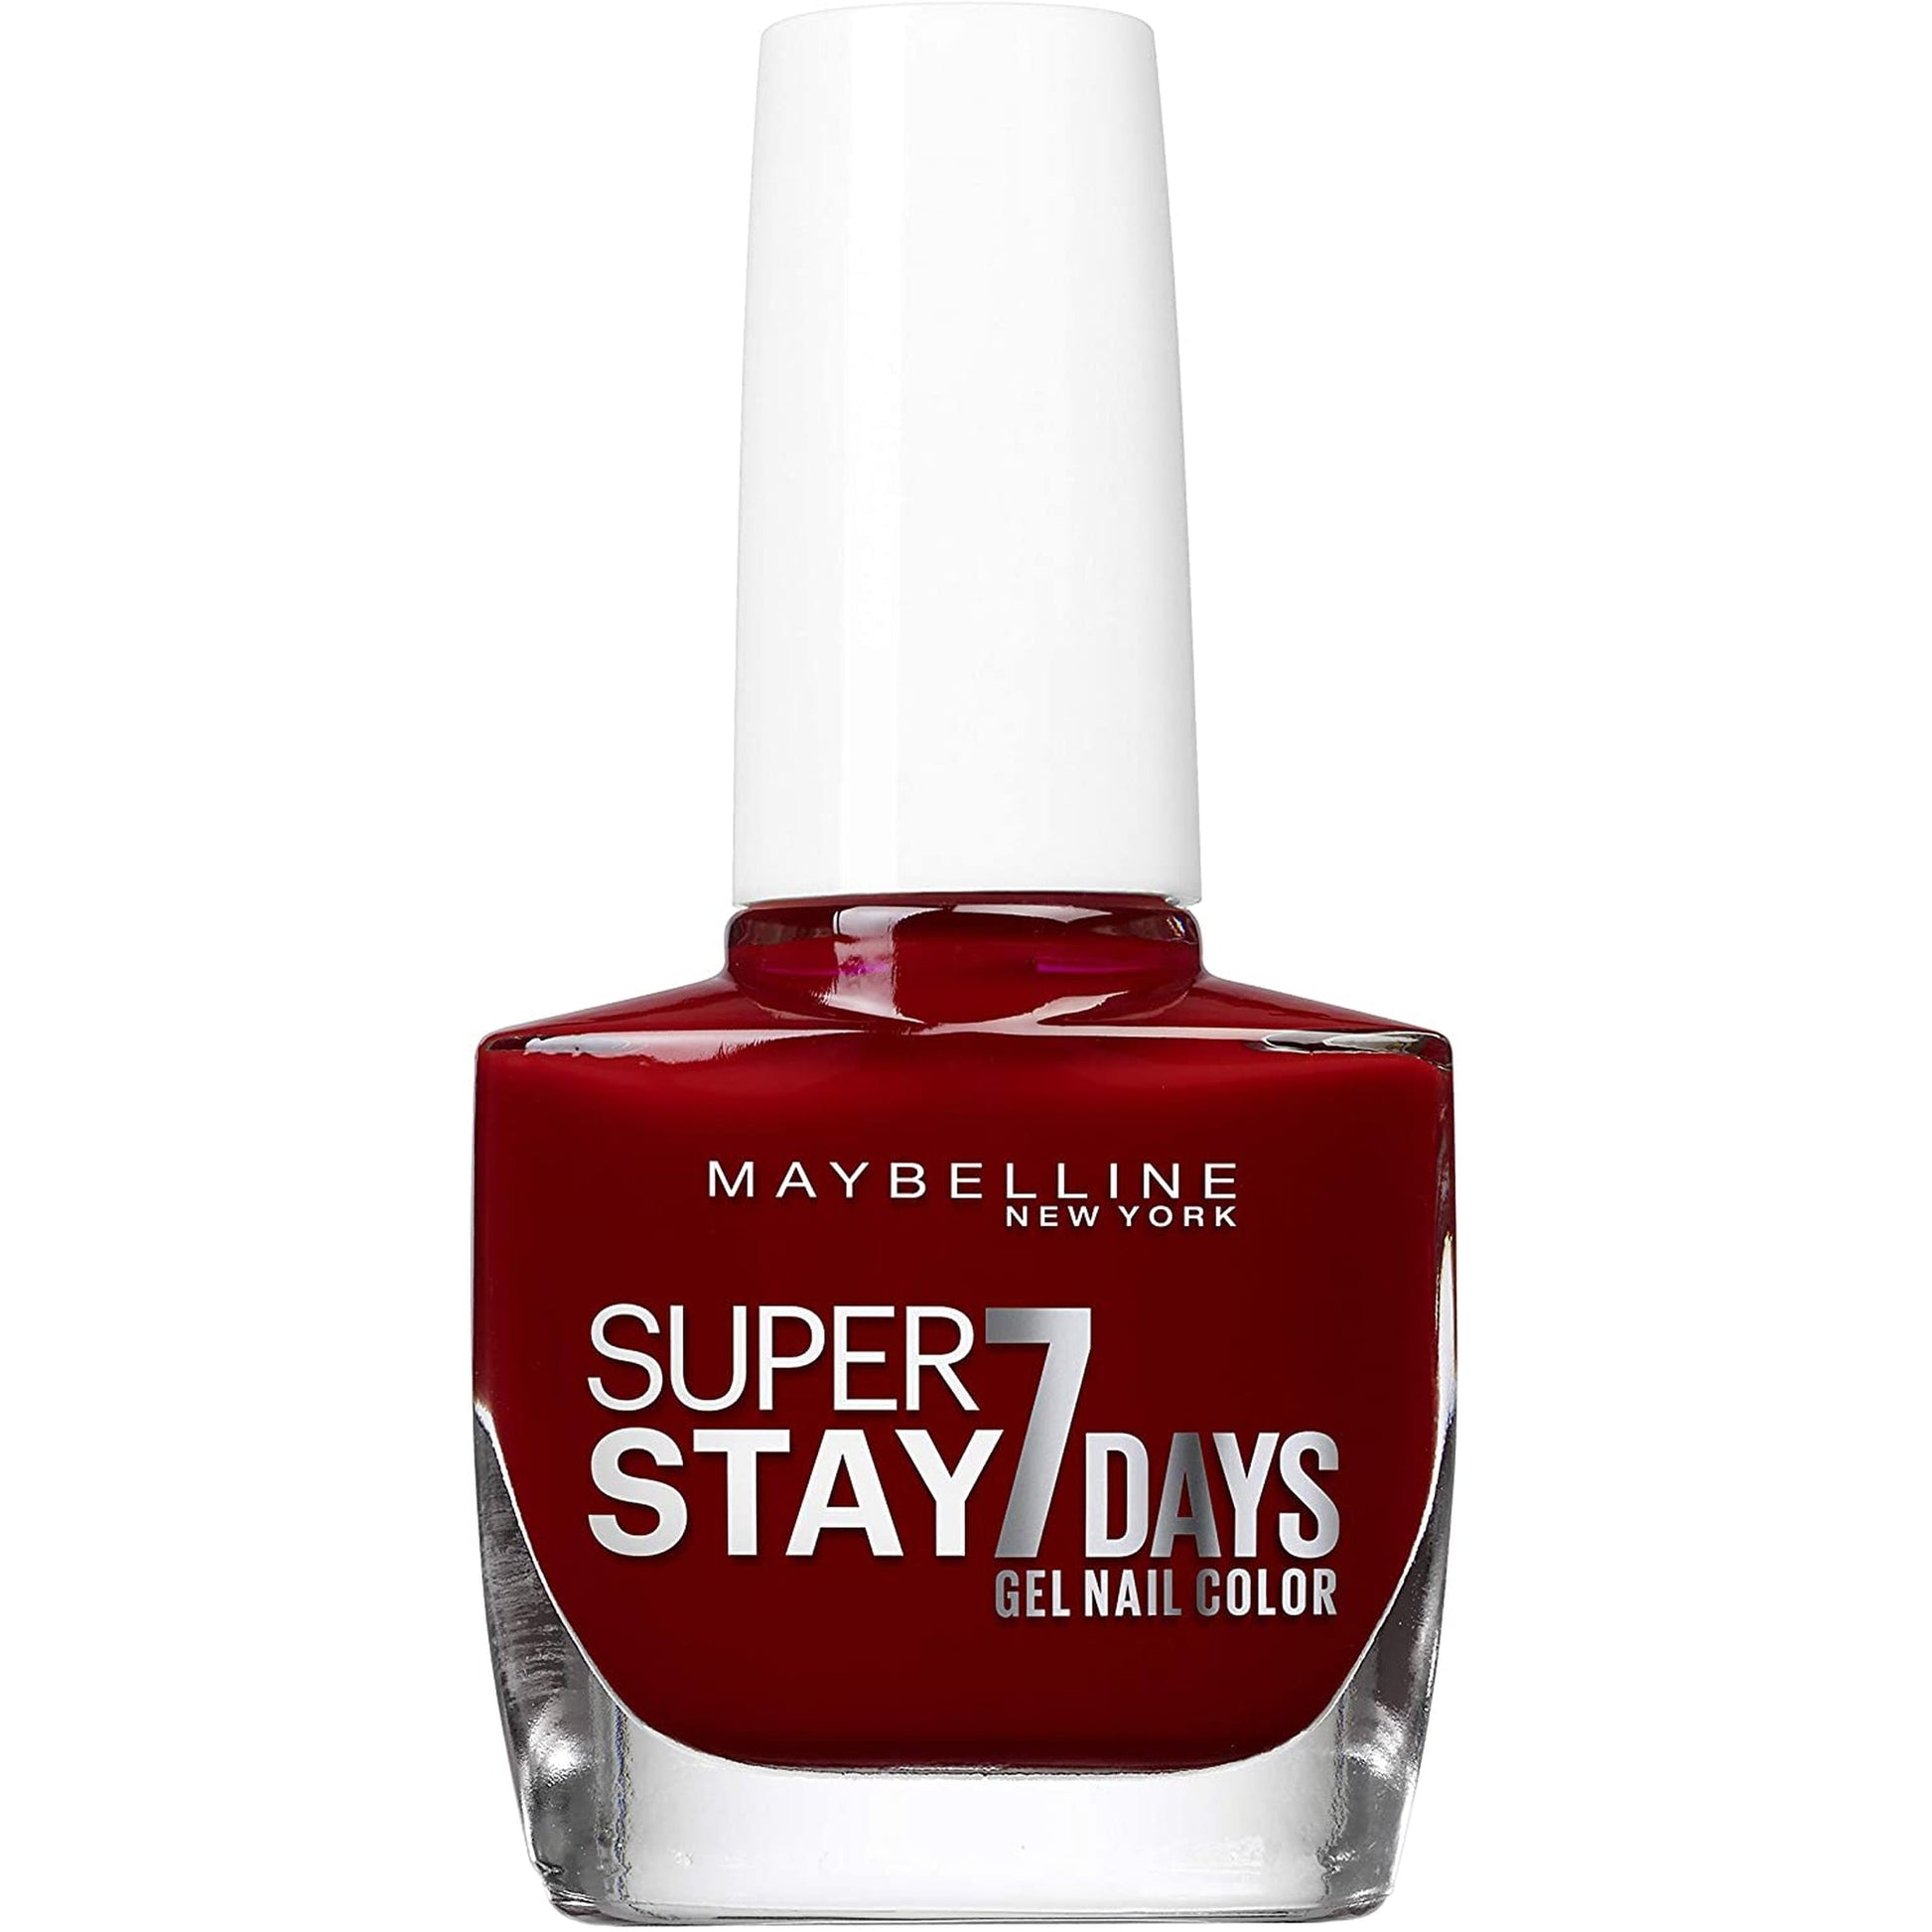 Maybelline Super Stay 7 Days Gel Nail Polish 501 Cherry Sin-Maybelline-BeautyNmakeup.co.uk